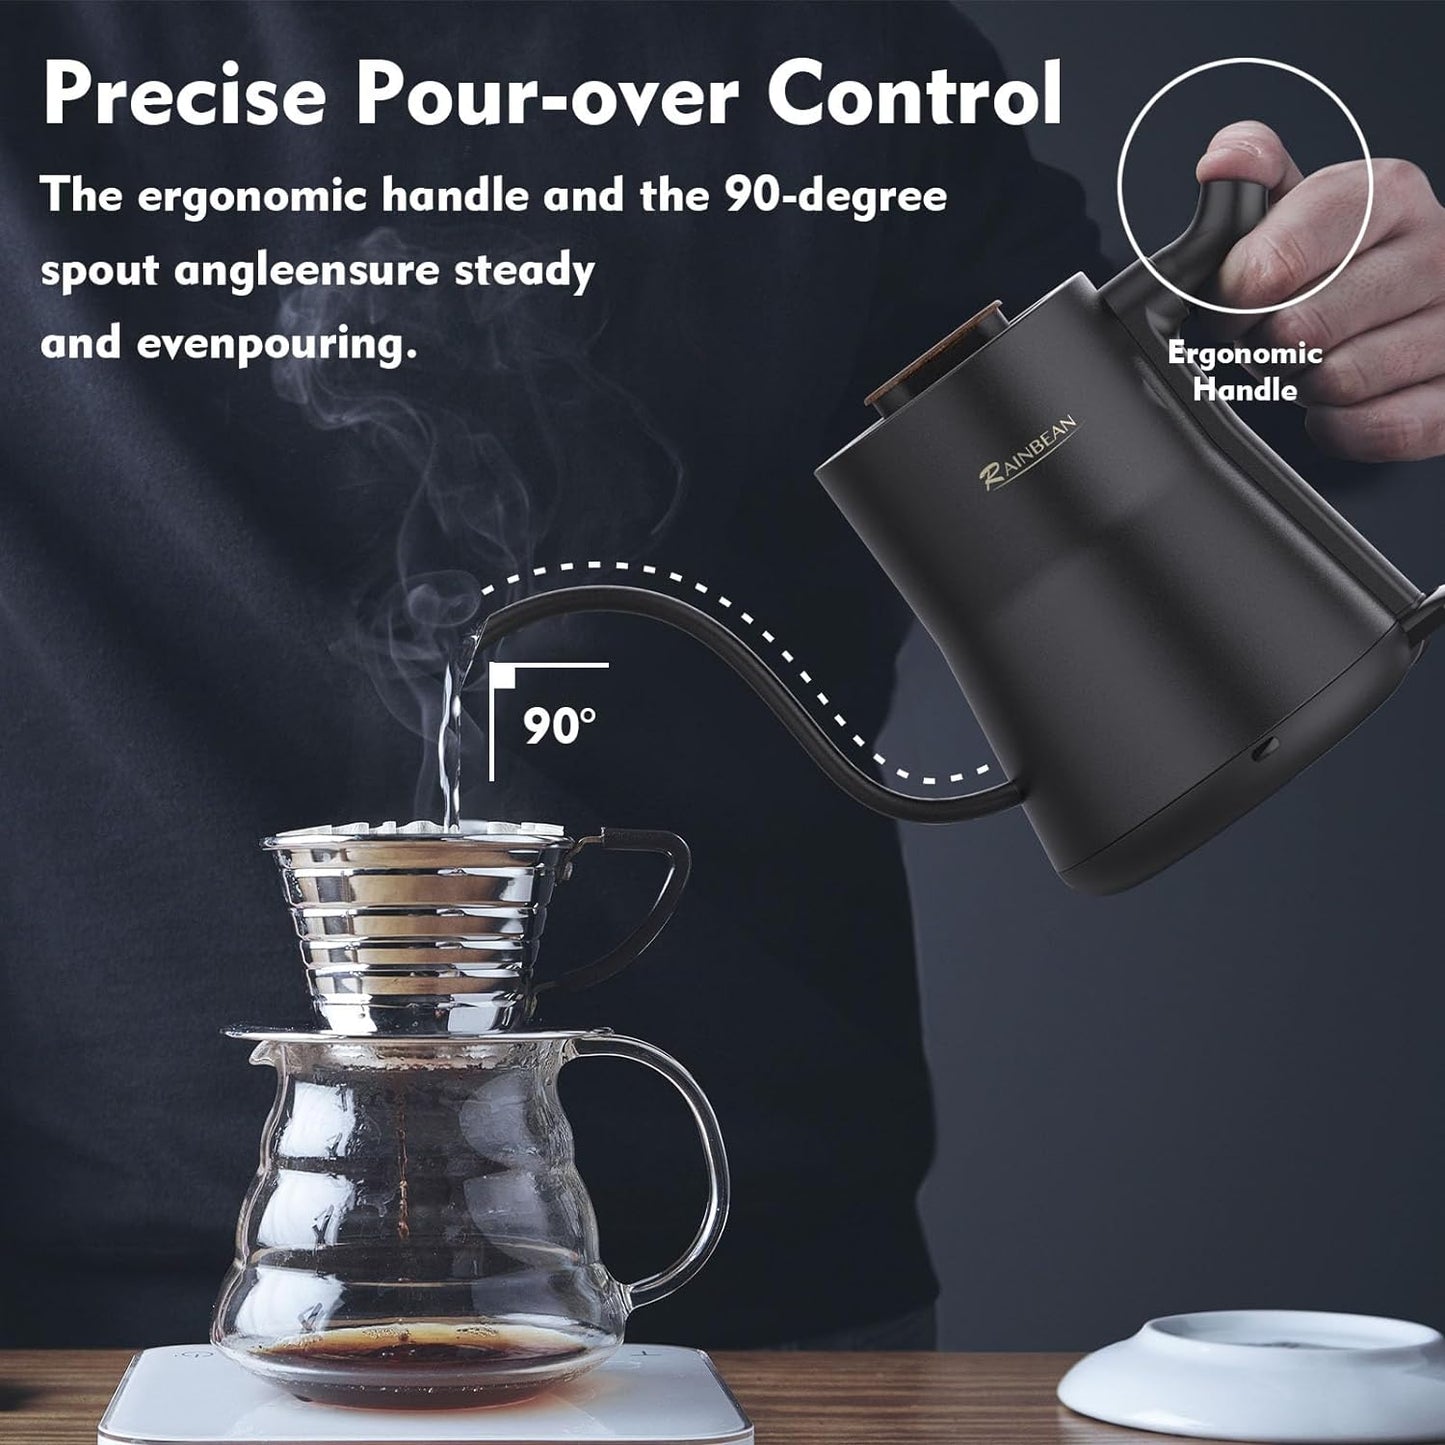 Gooseneck Electric Kettle Ideal For Pour Over Coffee